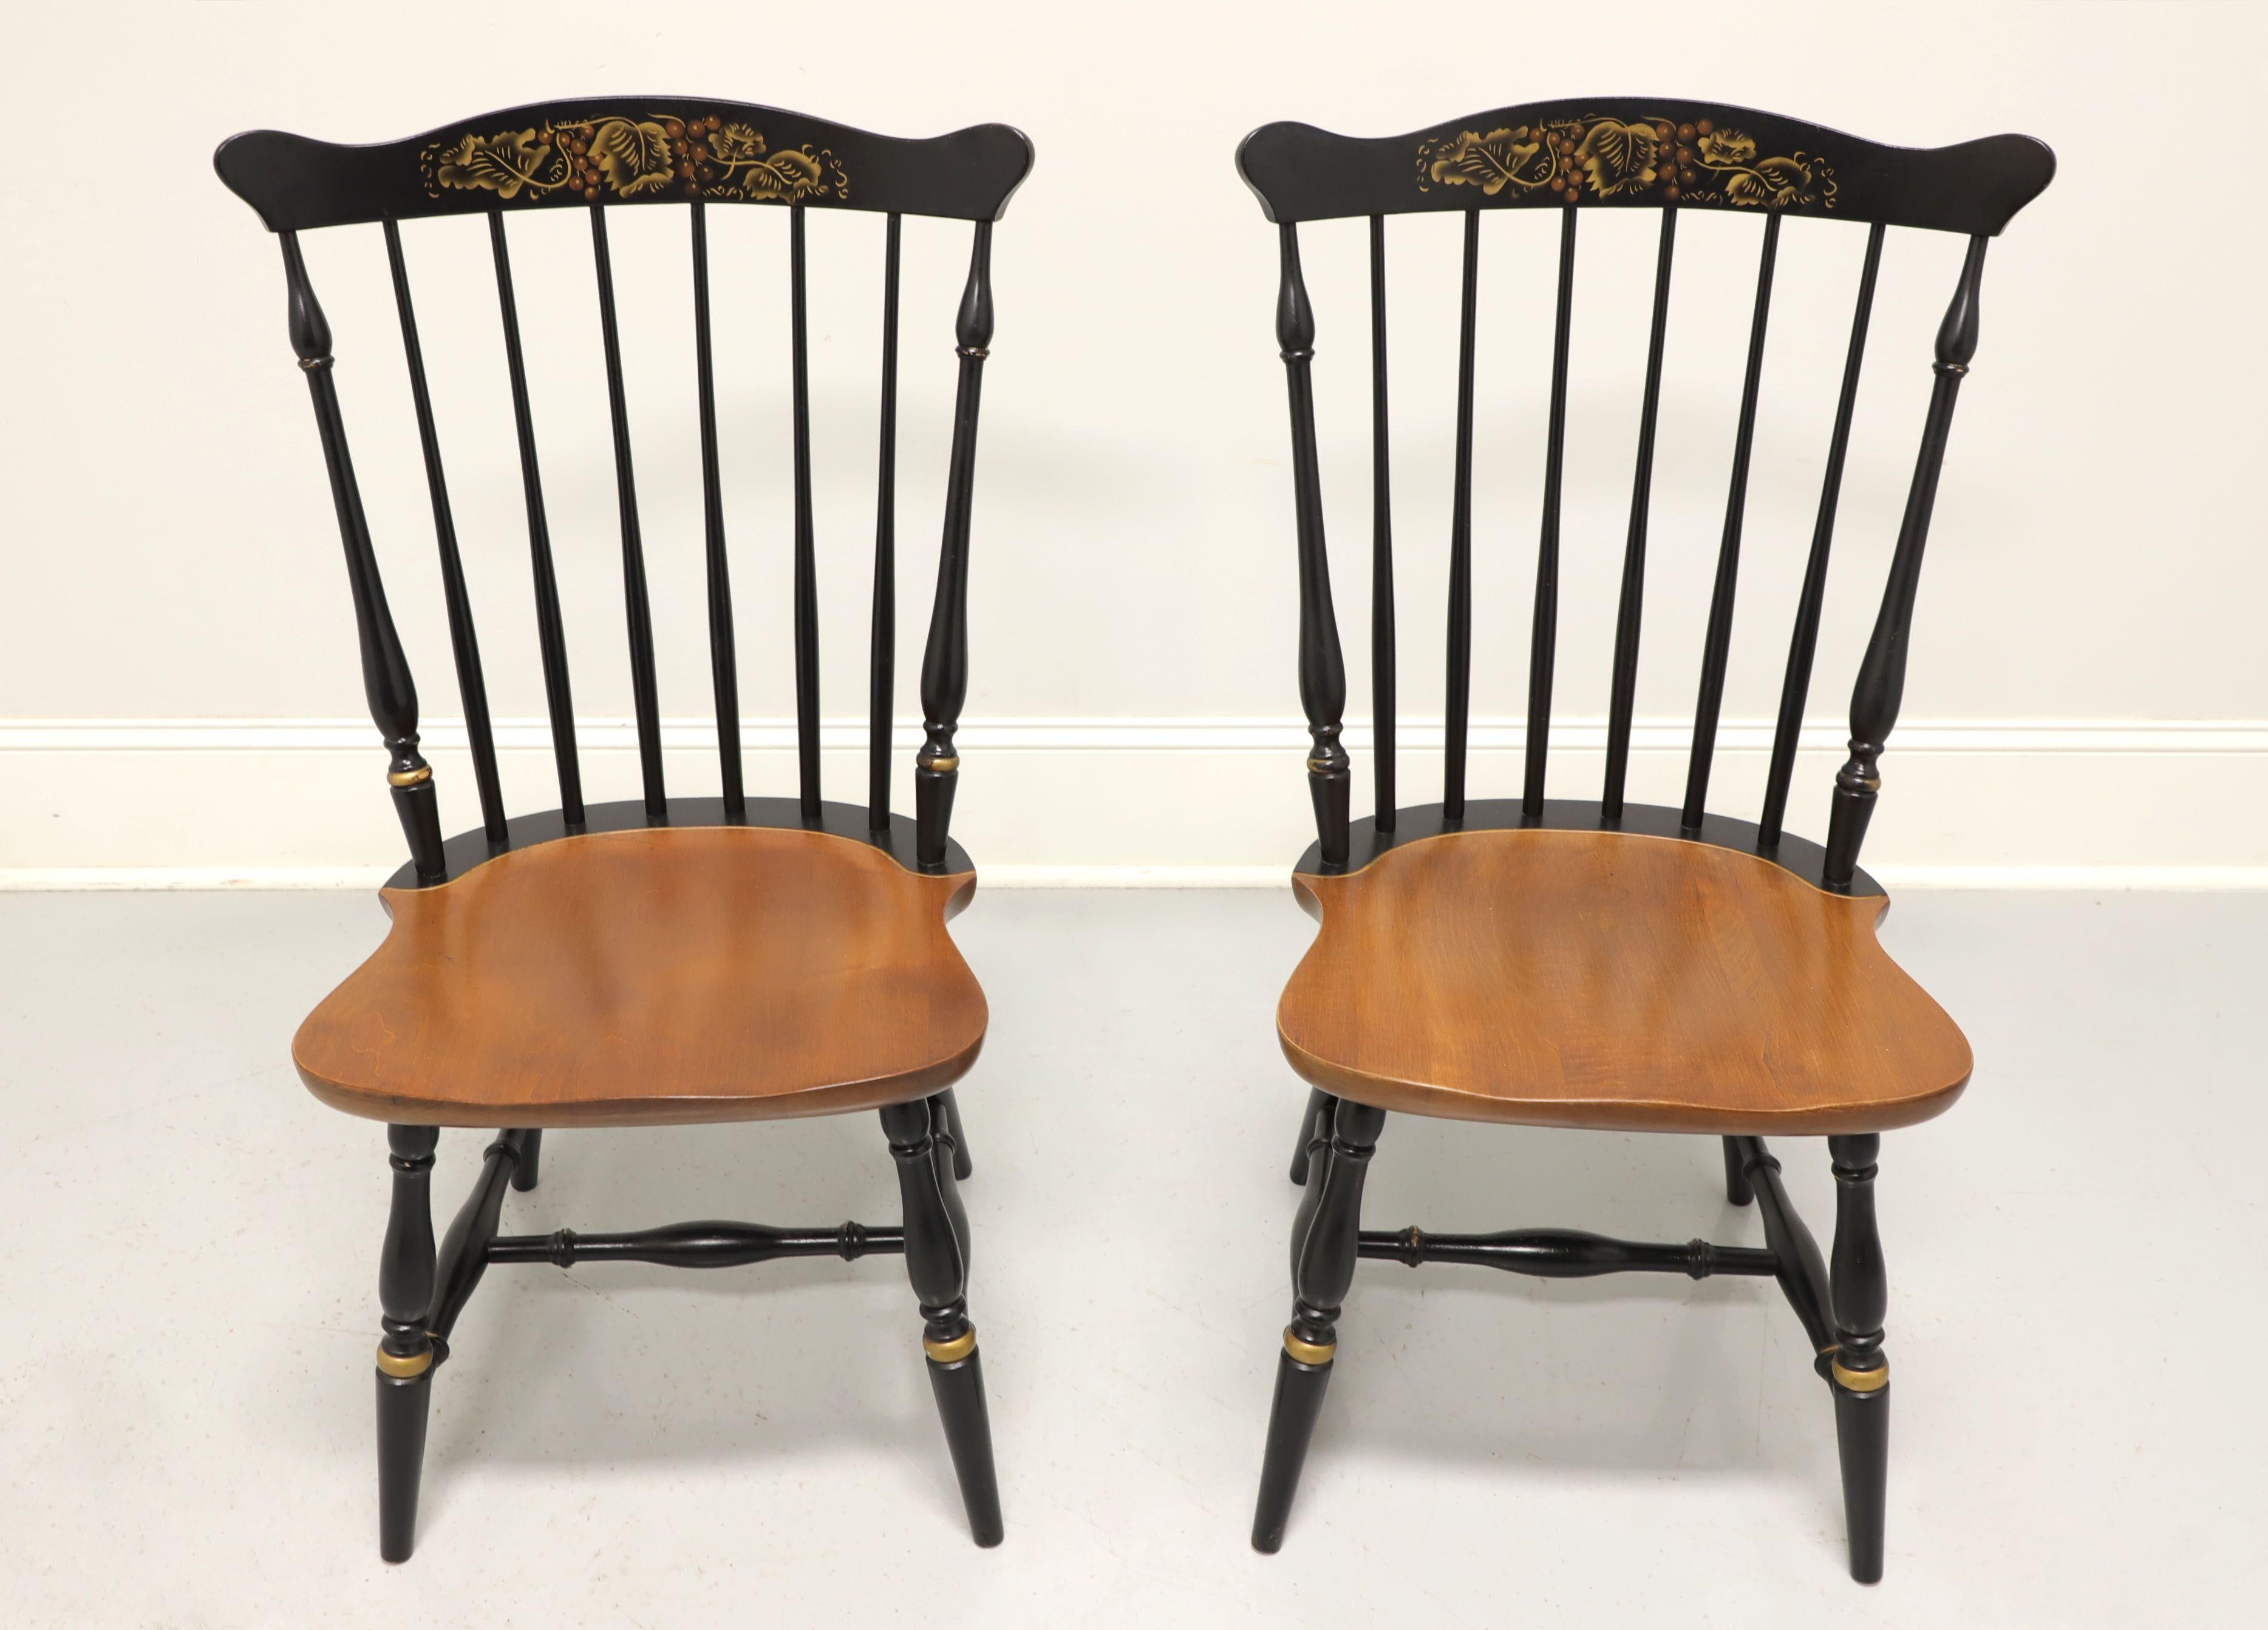 A pair of Windsor style dining side chairs by Hitchcock Chair Co. Solid maple with black lacquer, decorative stenciling to crest rail, gold accents, spindle backs, maple seat, turned legs and stretcher base. Made in Connecticut, USA, in the mid 20th